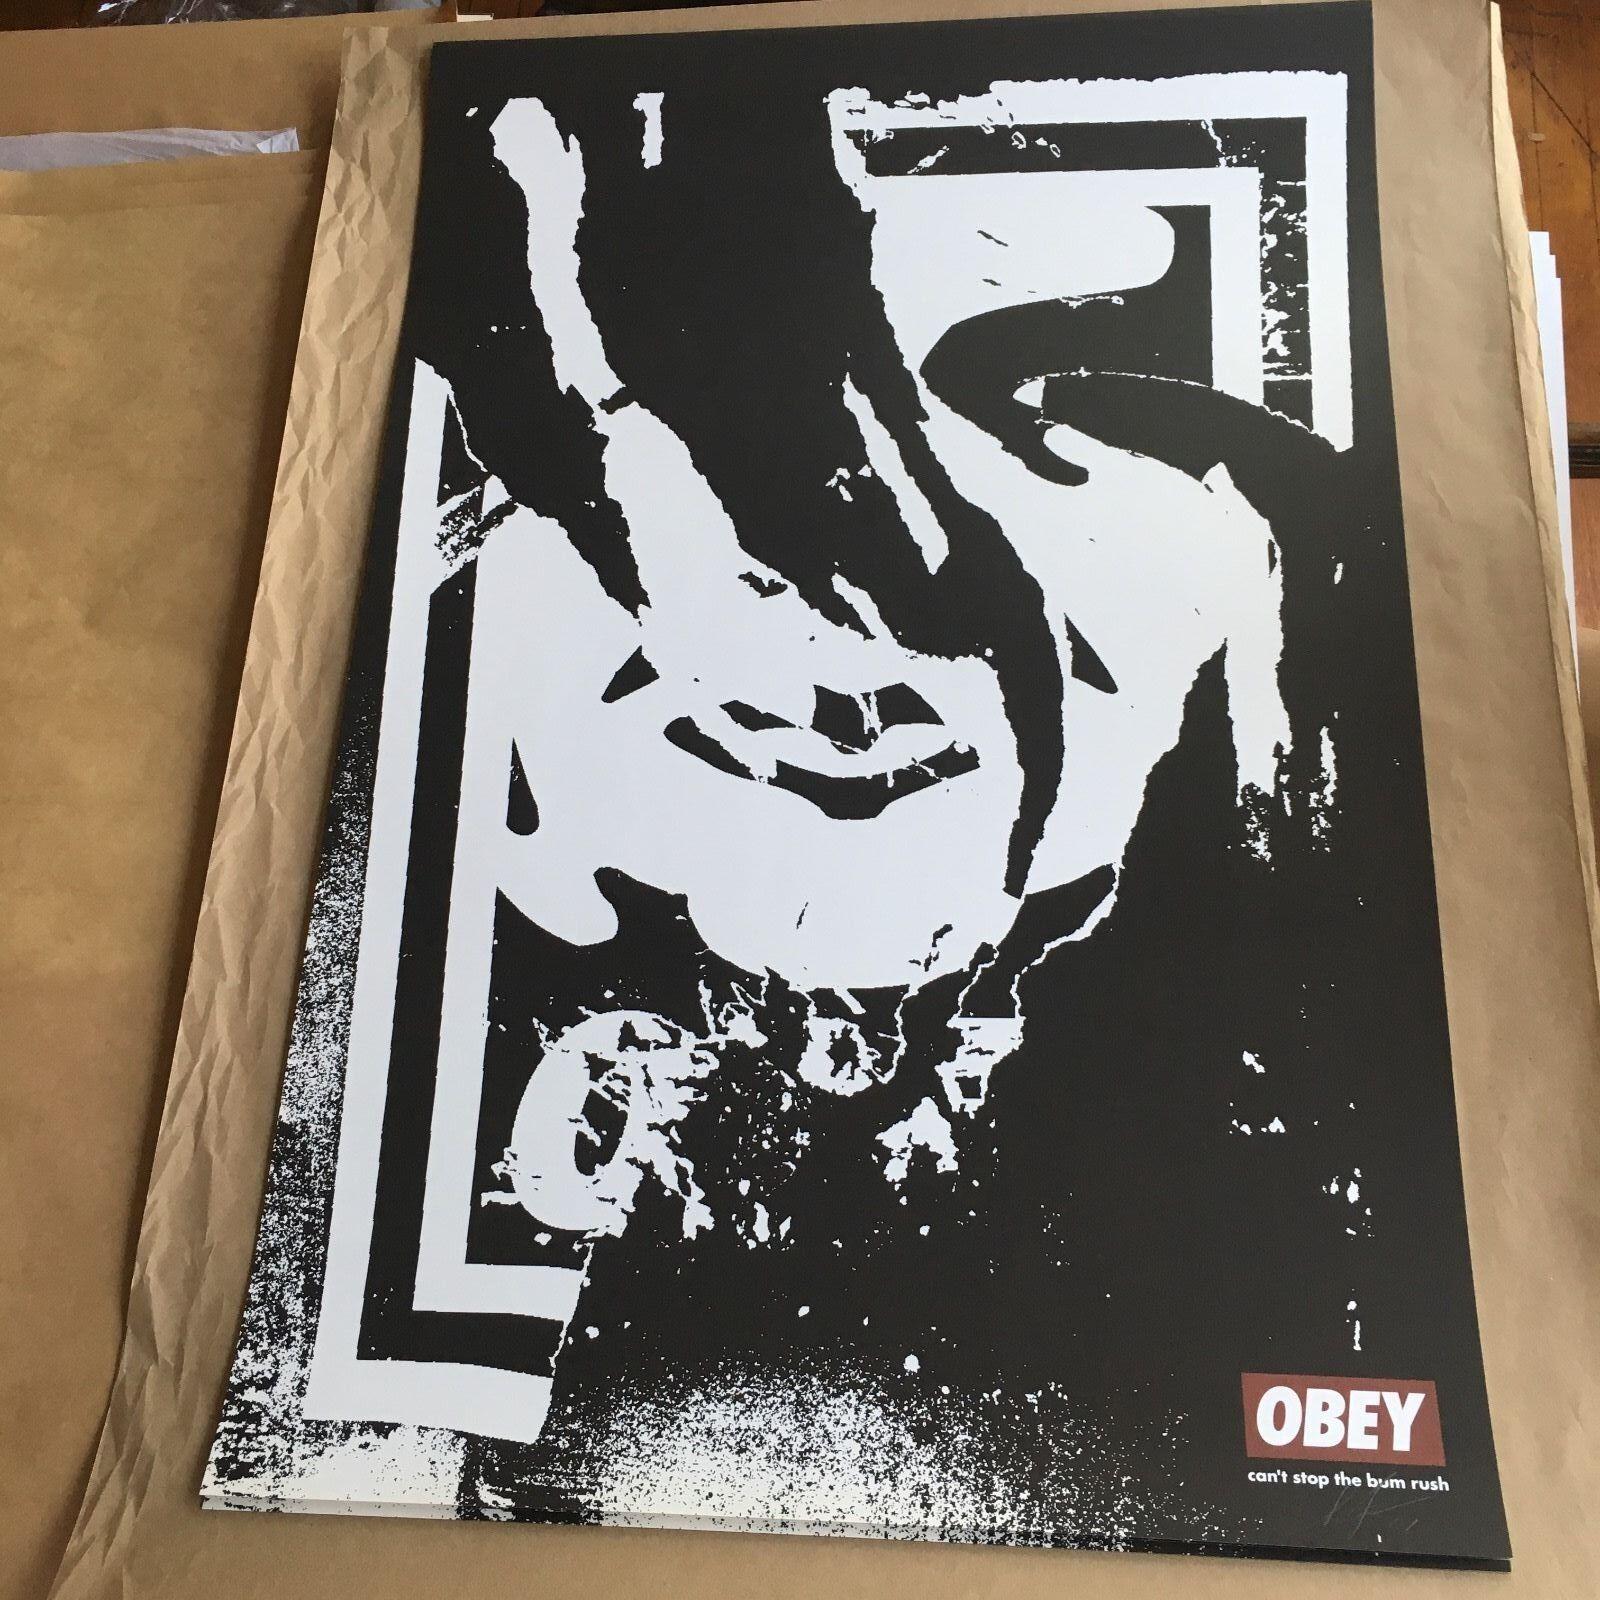 Obey "Cant Stop the Bum Rush" Classic Image Produced in 2001 Signed Lithograph - Print by Shepard Fairey